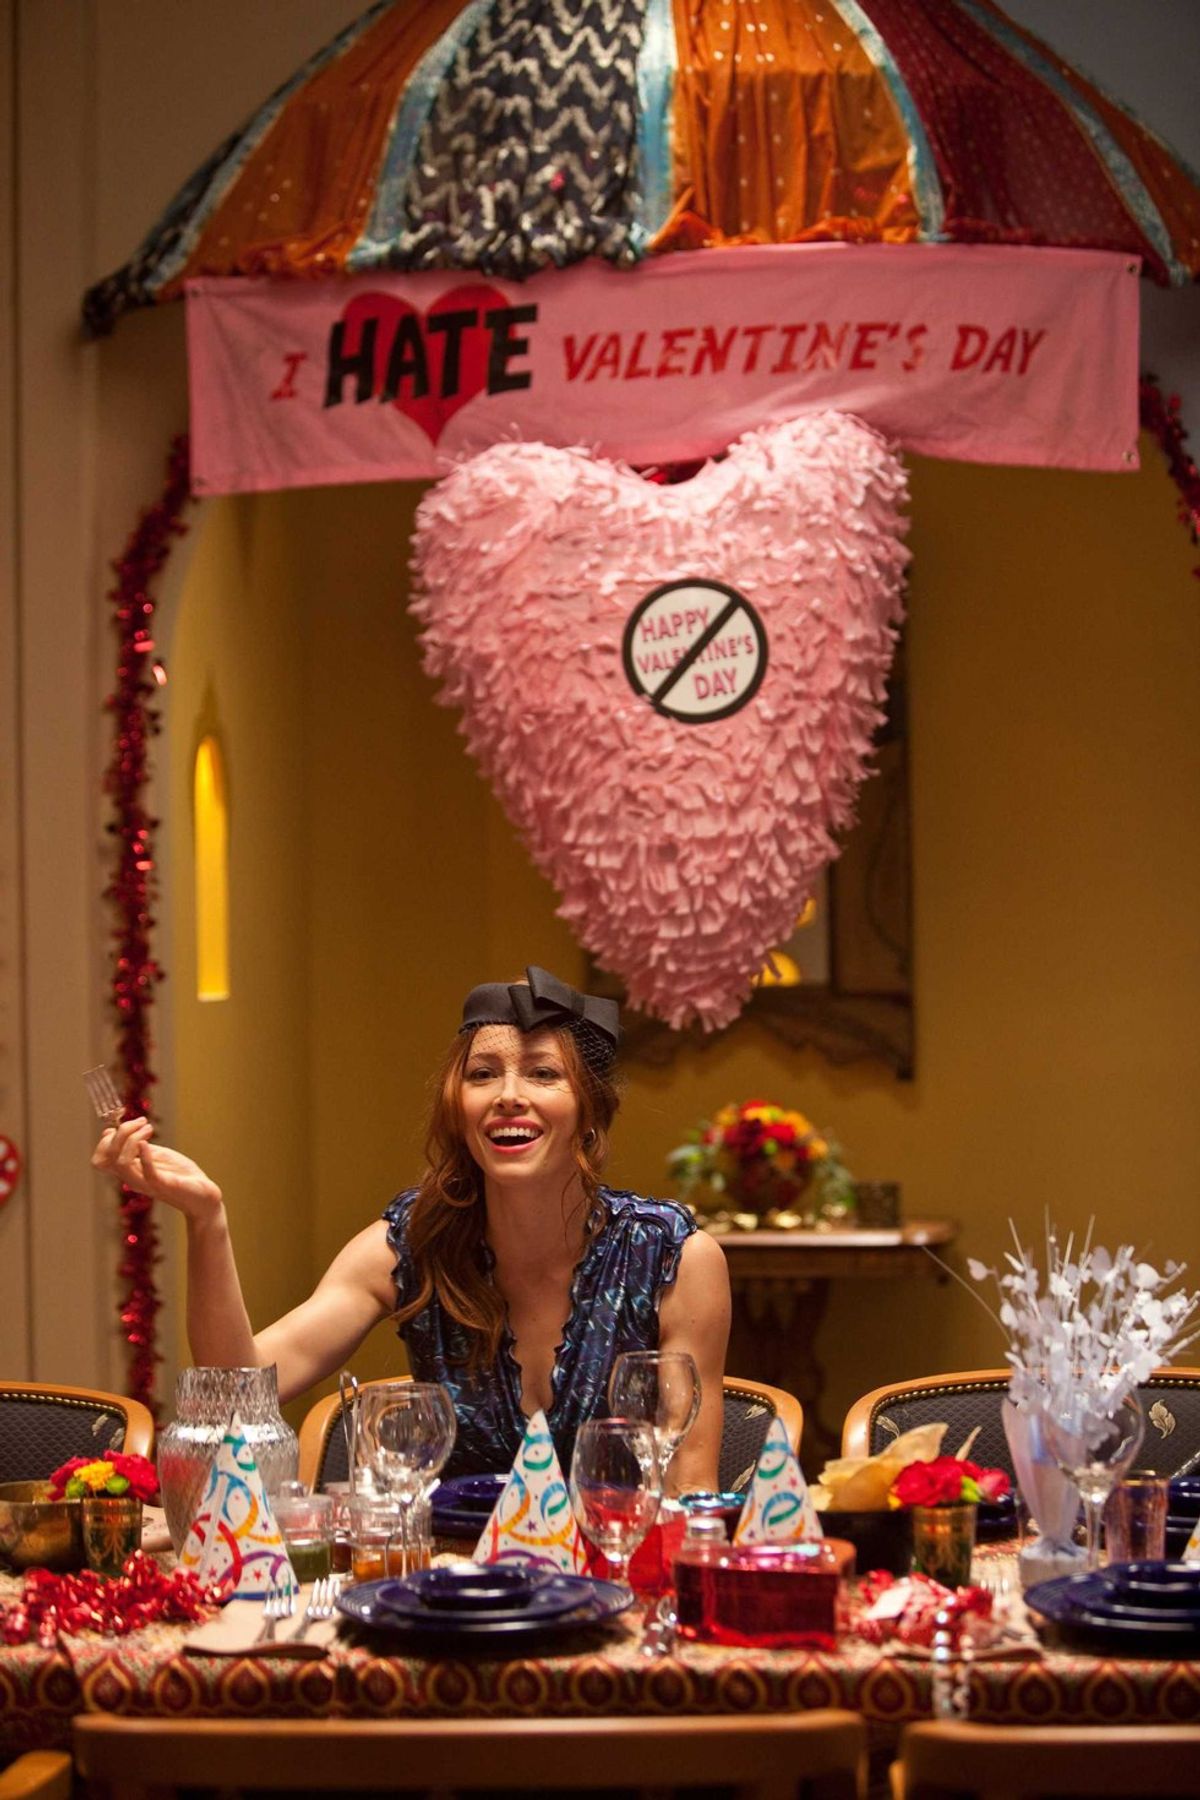 10 Things for Single People to do on Valentine's Day